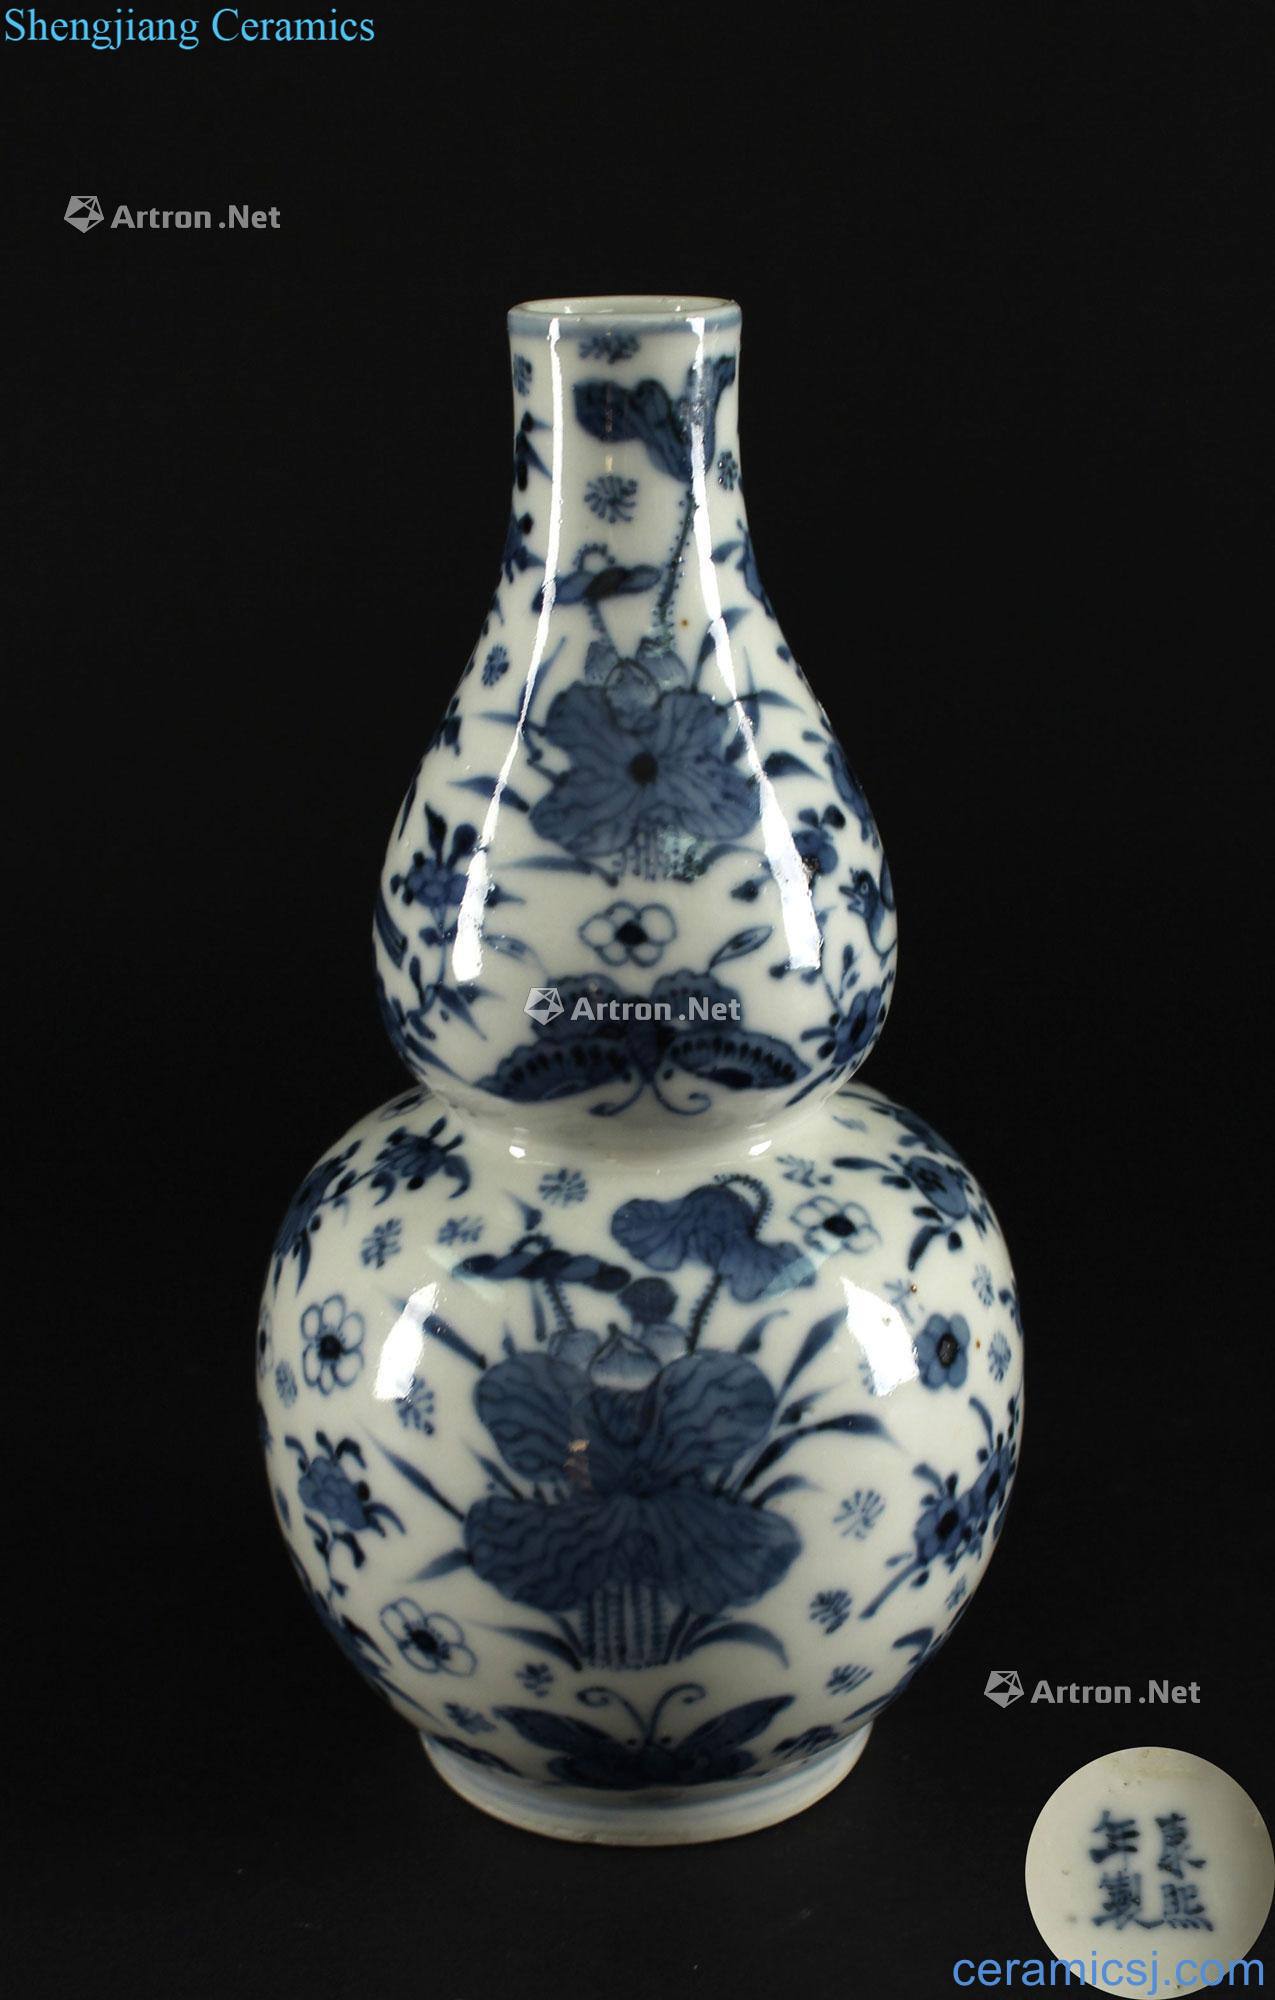 The imitation of kangxi reign of qing emperor guangxu Blue and white flower on grain gourd bottle